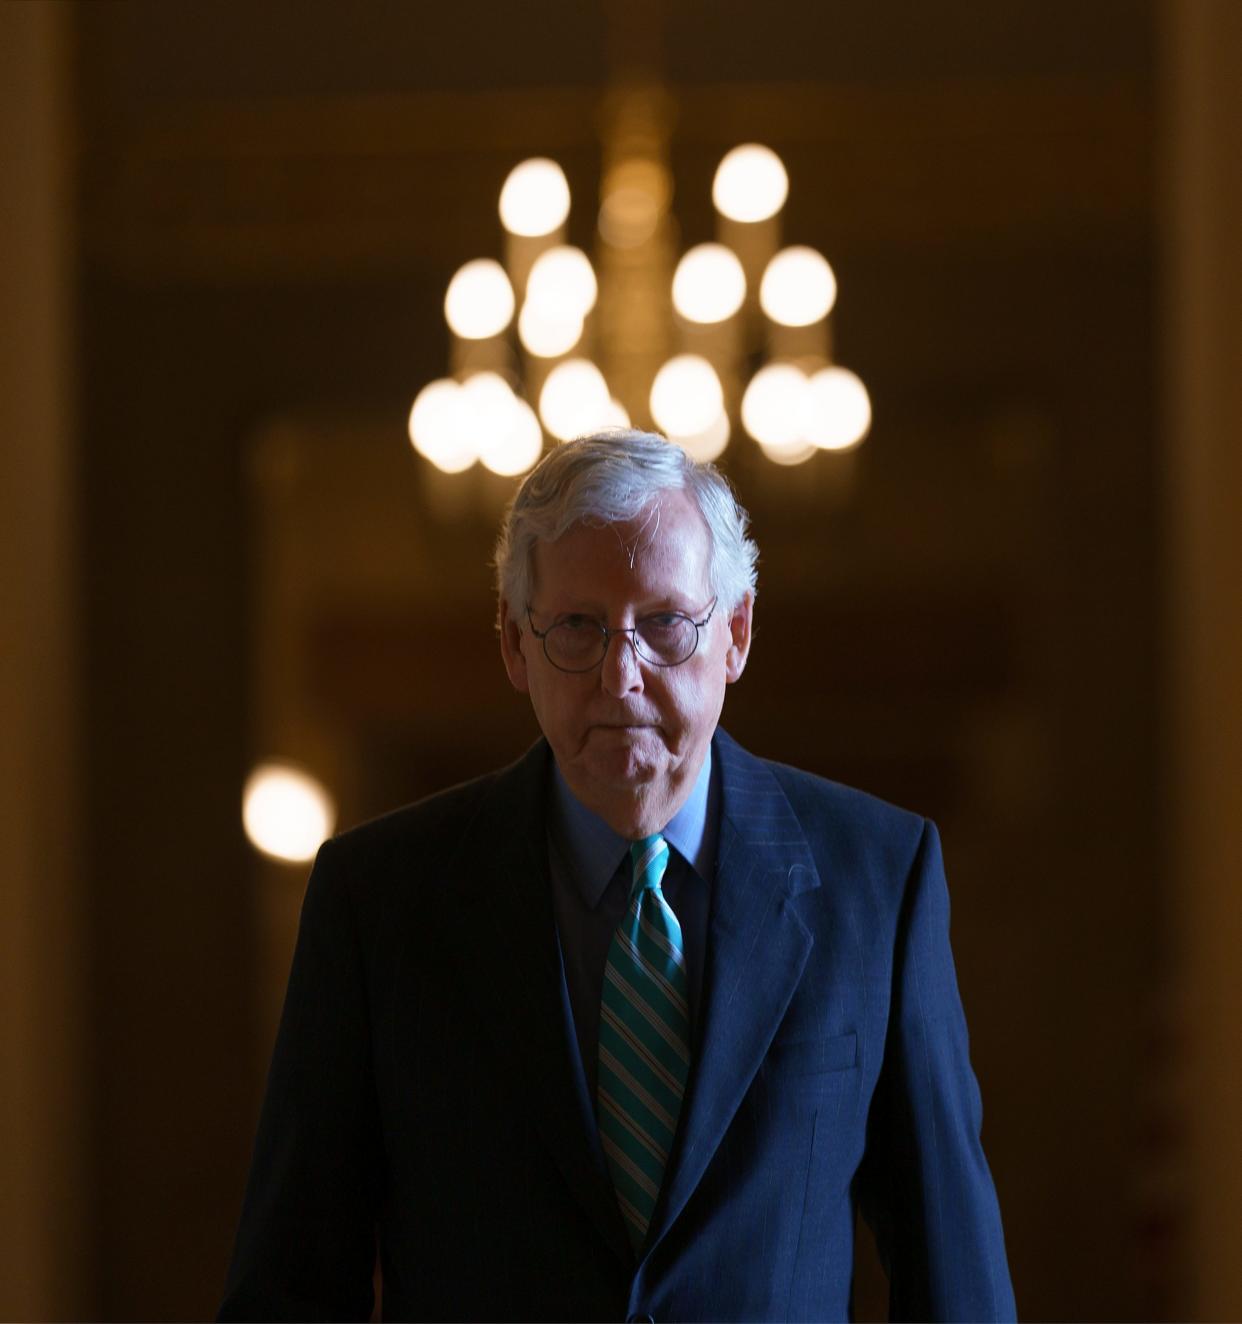 Senate Minority Leader Mitch McConnell, R-Ky., walks to the chamber for a vote, at the Capitol in Washington, Thursday, Oct. 7, 2021. Senate leaders announced an agreement to extend the government's borrowing authority into December, temporarily averting an unprecedented default that experts say would have decimated the economy. (AP Photo/J. Scott Applewhite) ORG XMIT: DCSA124